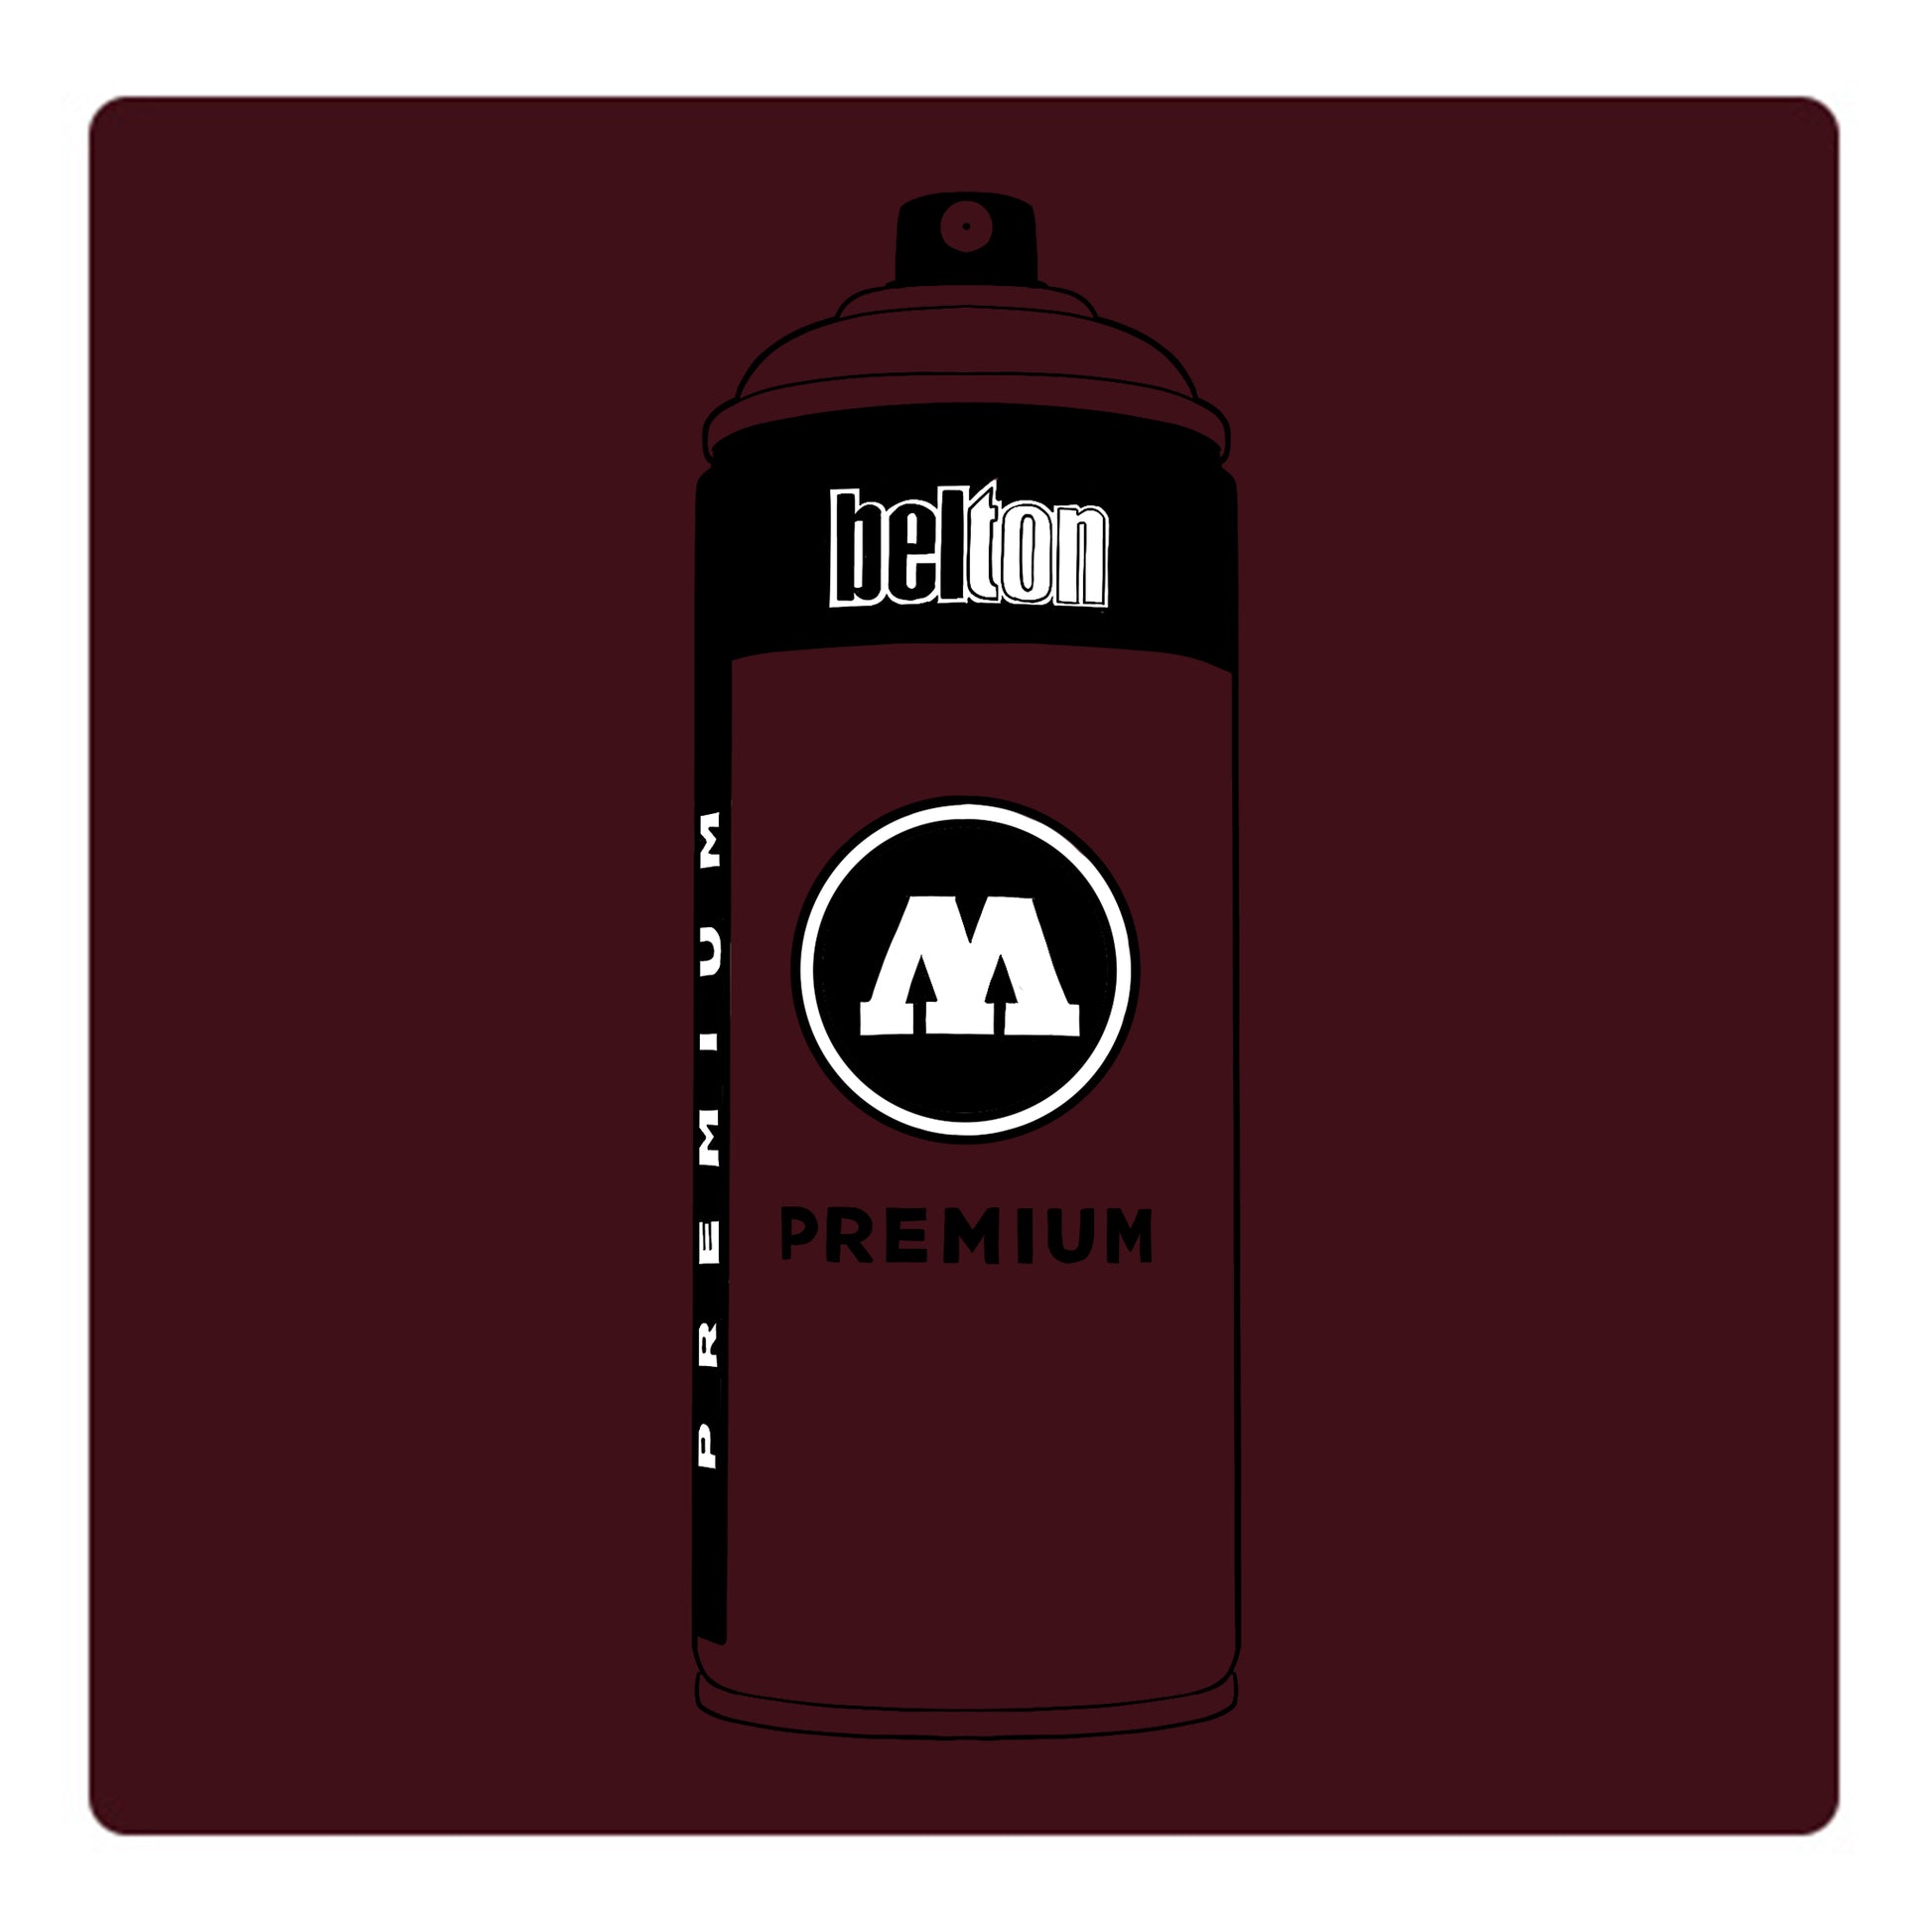 A black outline drawing of a wine red spray paint can with the words "belton","premium" and the letter"M" written on the face in black and white font. The background is a color swatch of the same wine red with a white border.